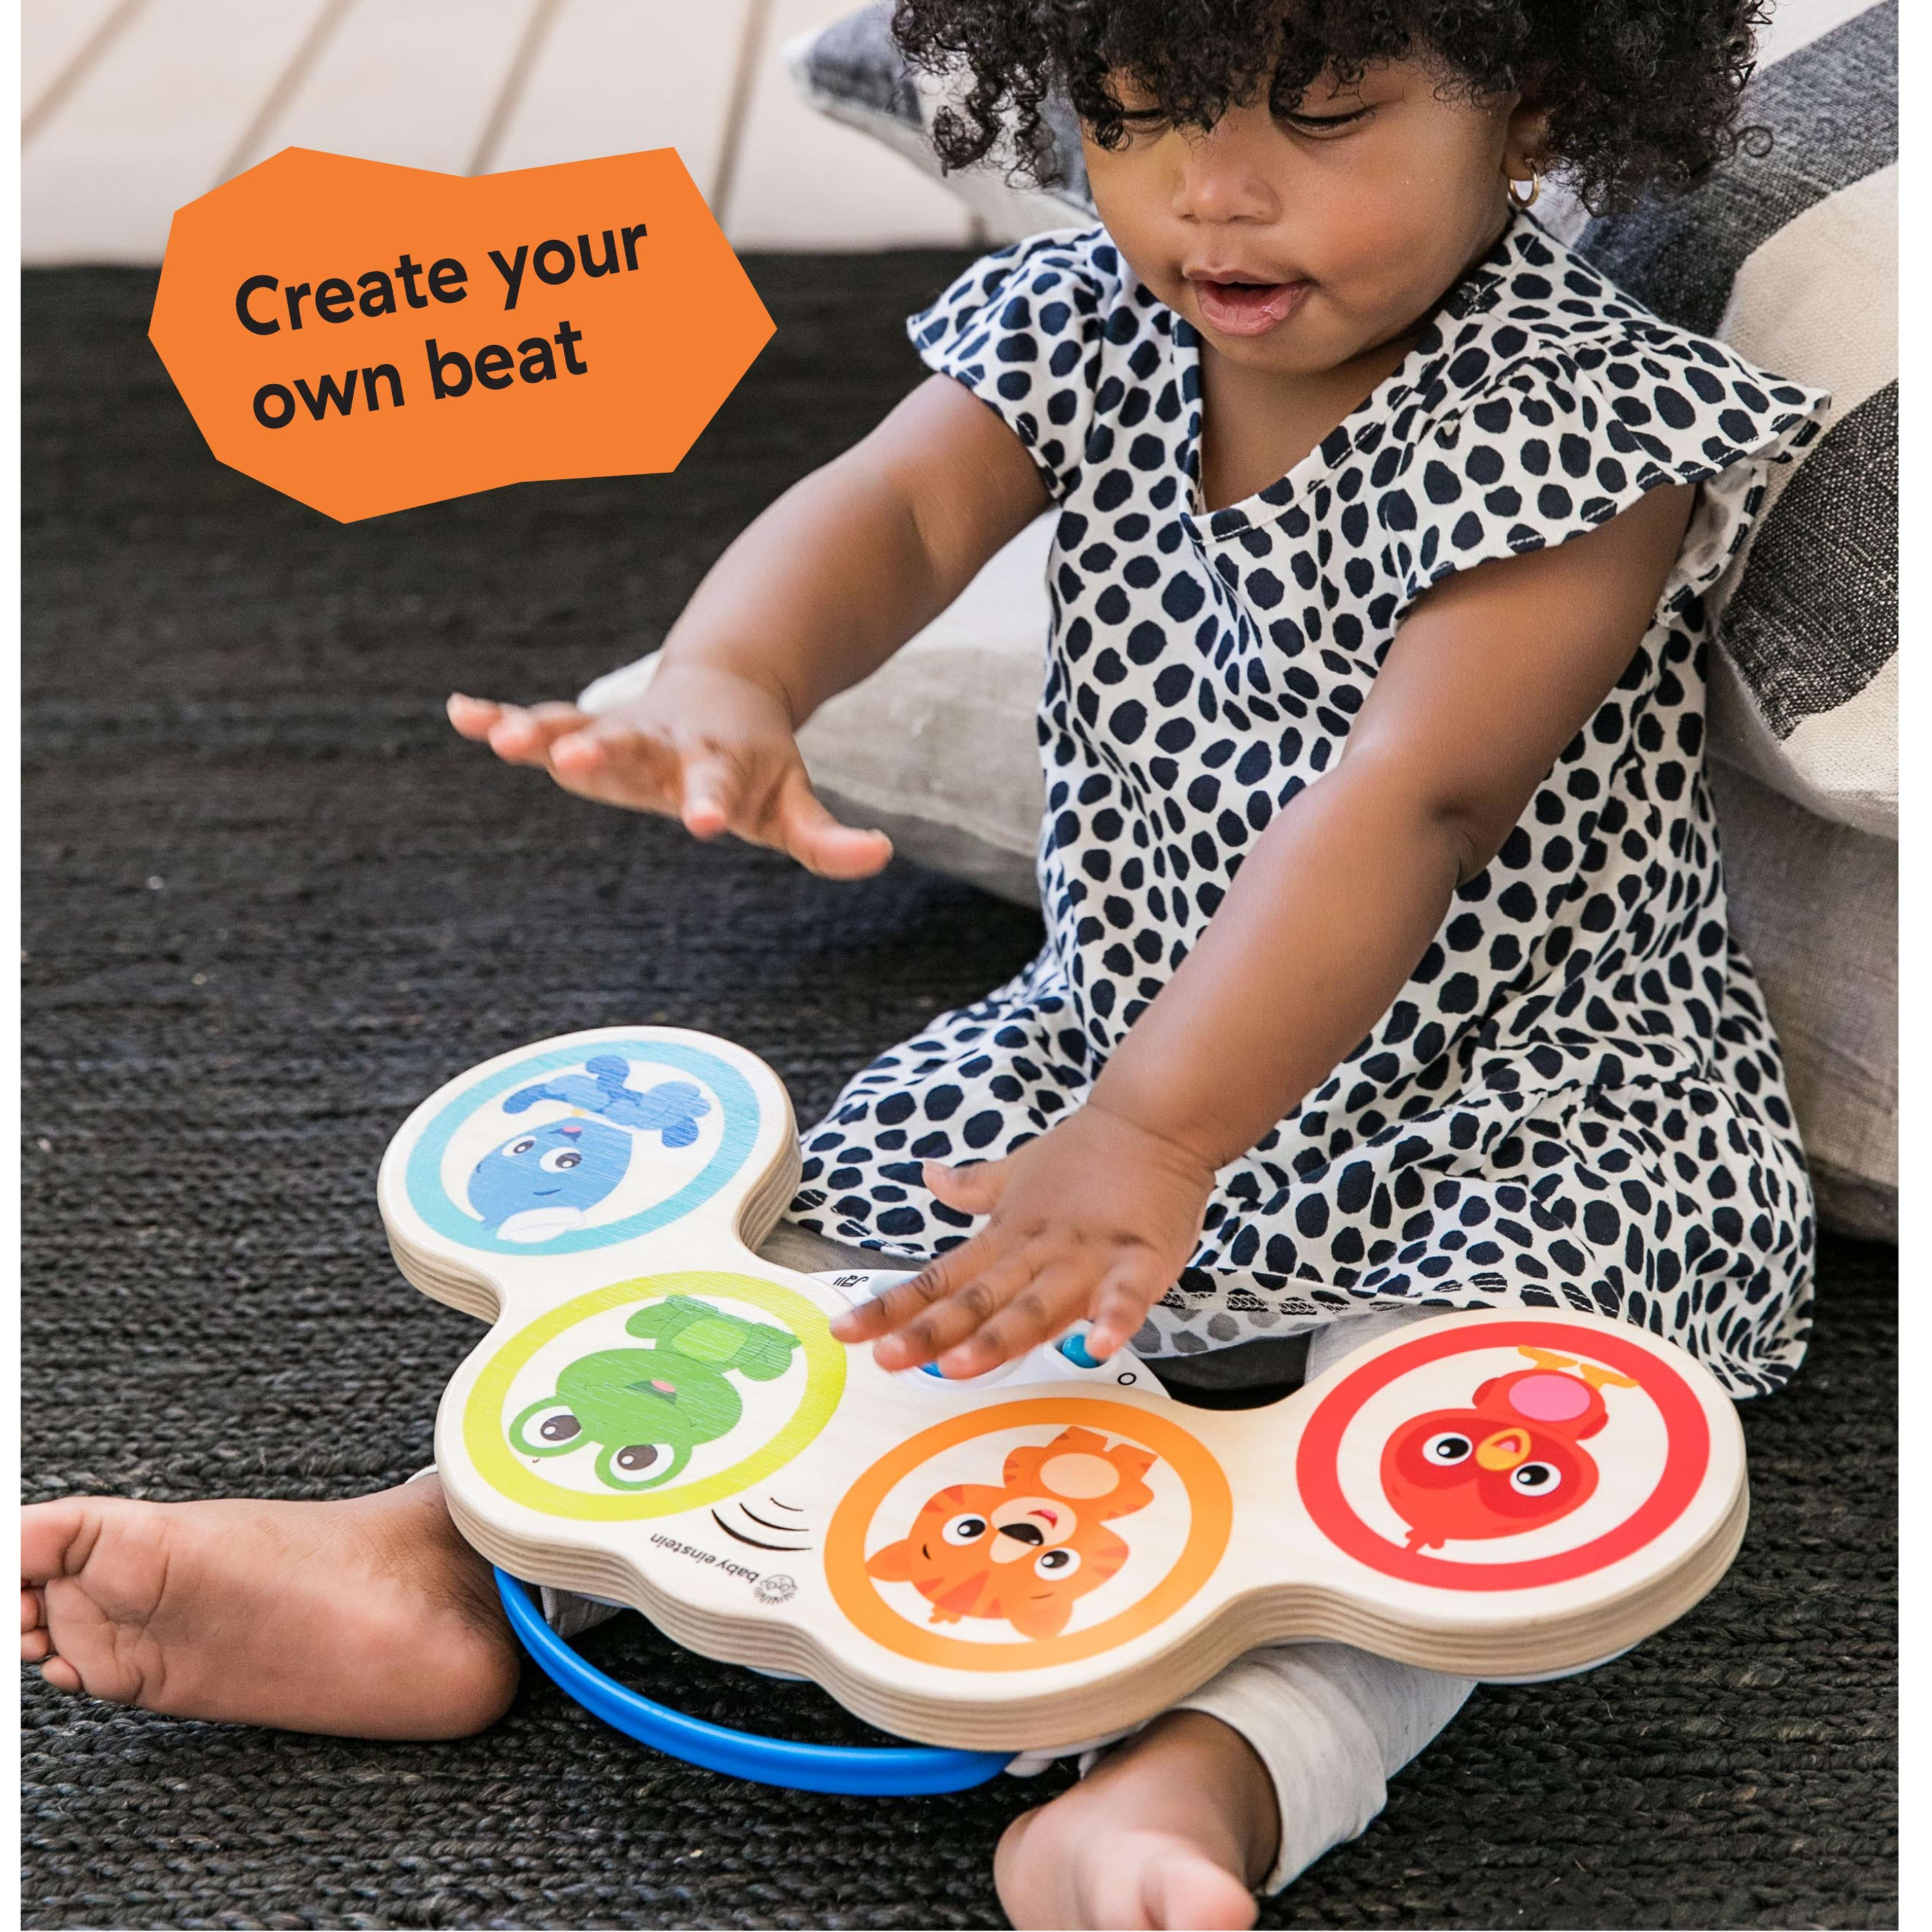 Baby Einstein Magic Touch Drums Wooden Musical Baby Toy, Unisex, Ages 6 months+ - image 4 of 6